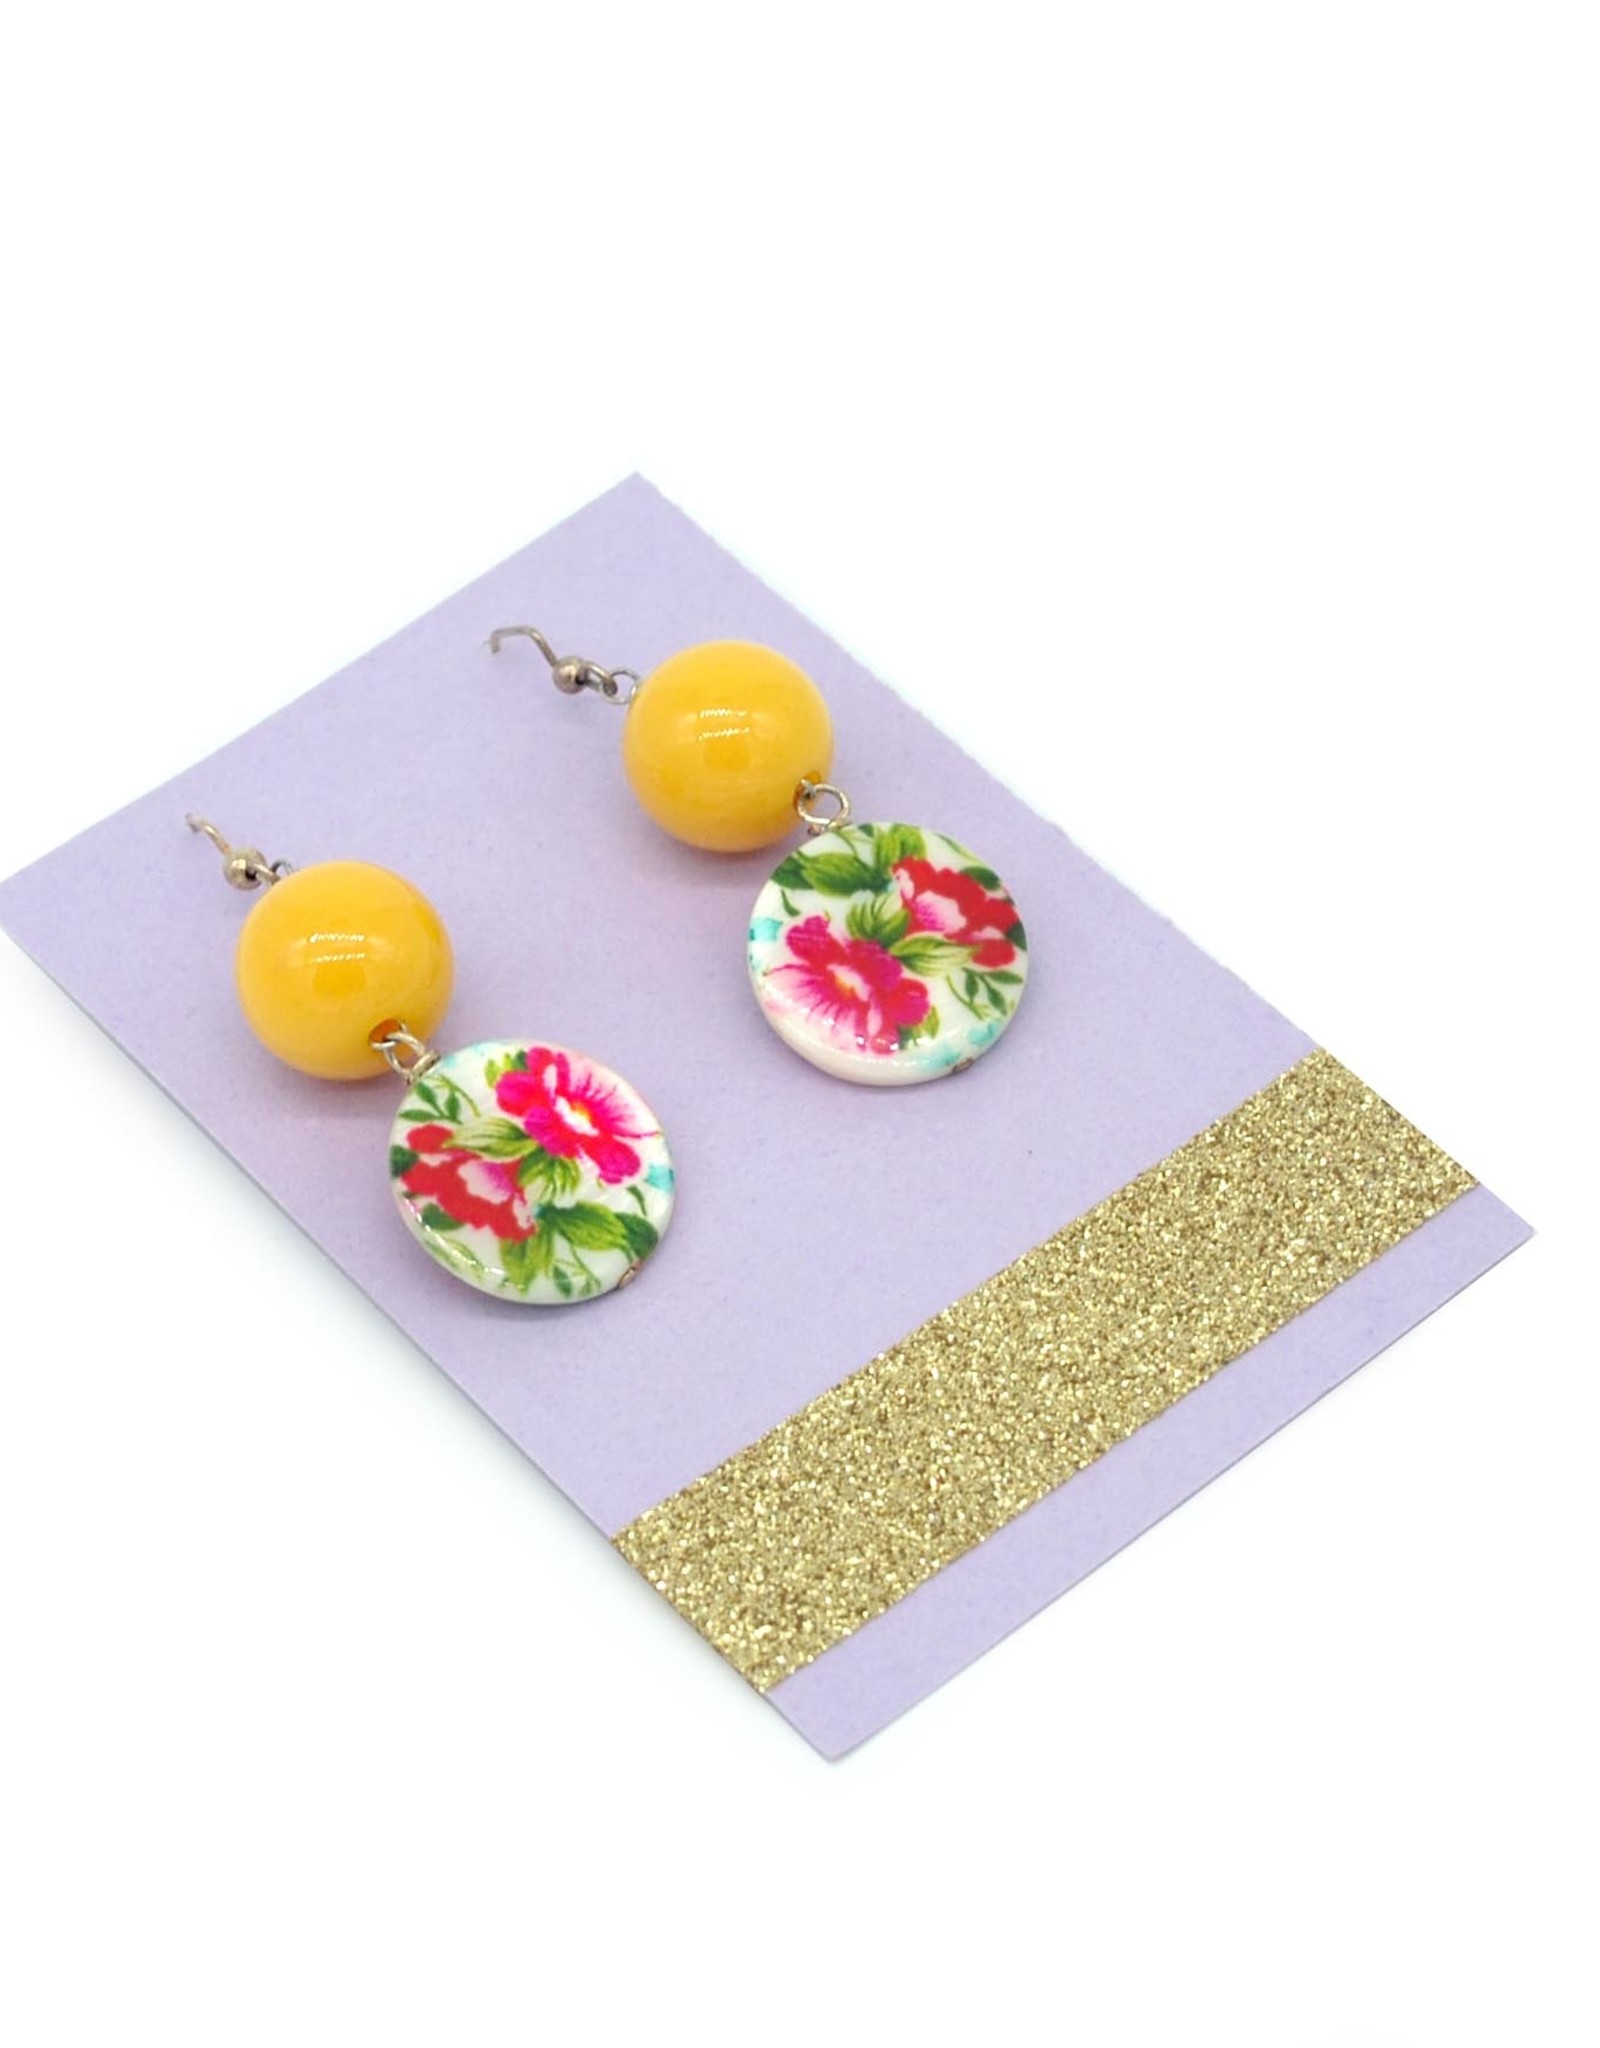 Floral button and bead earrings by Dana Diederich